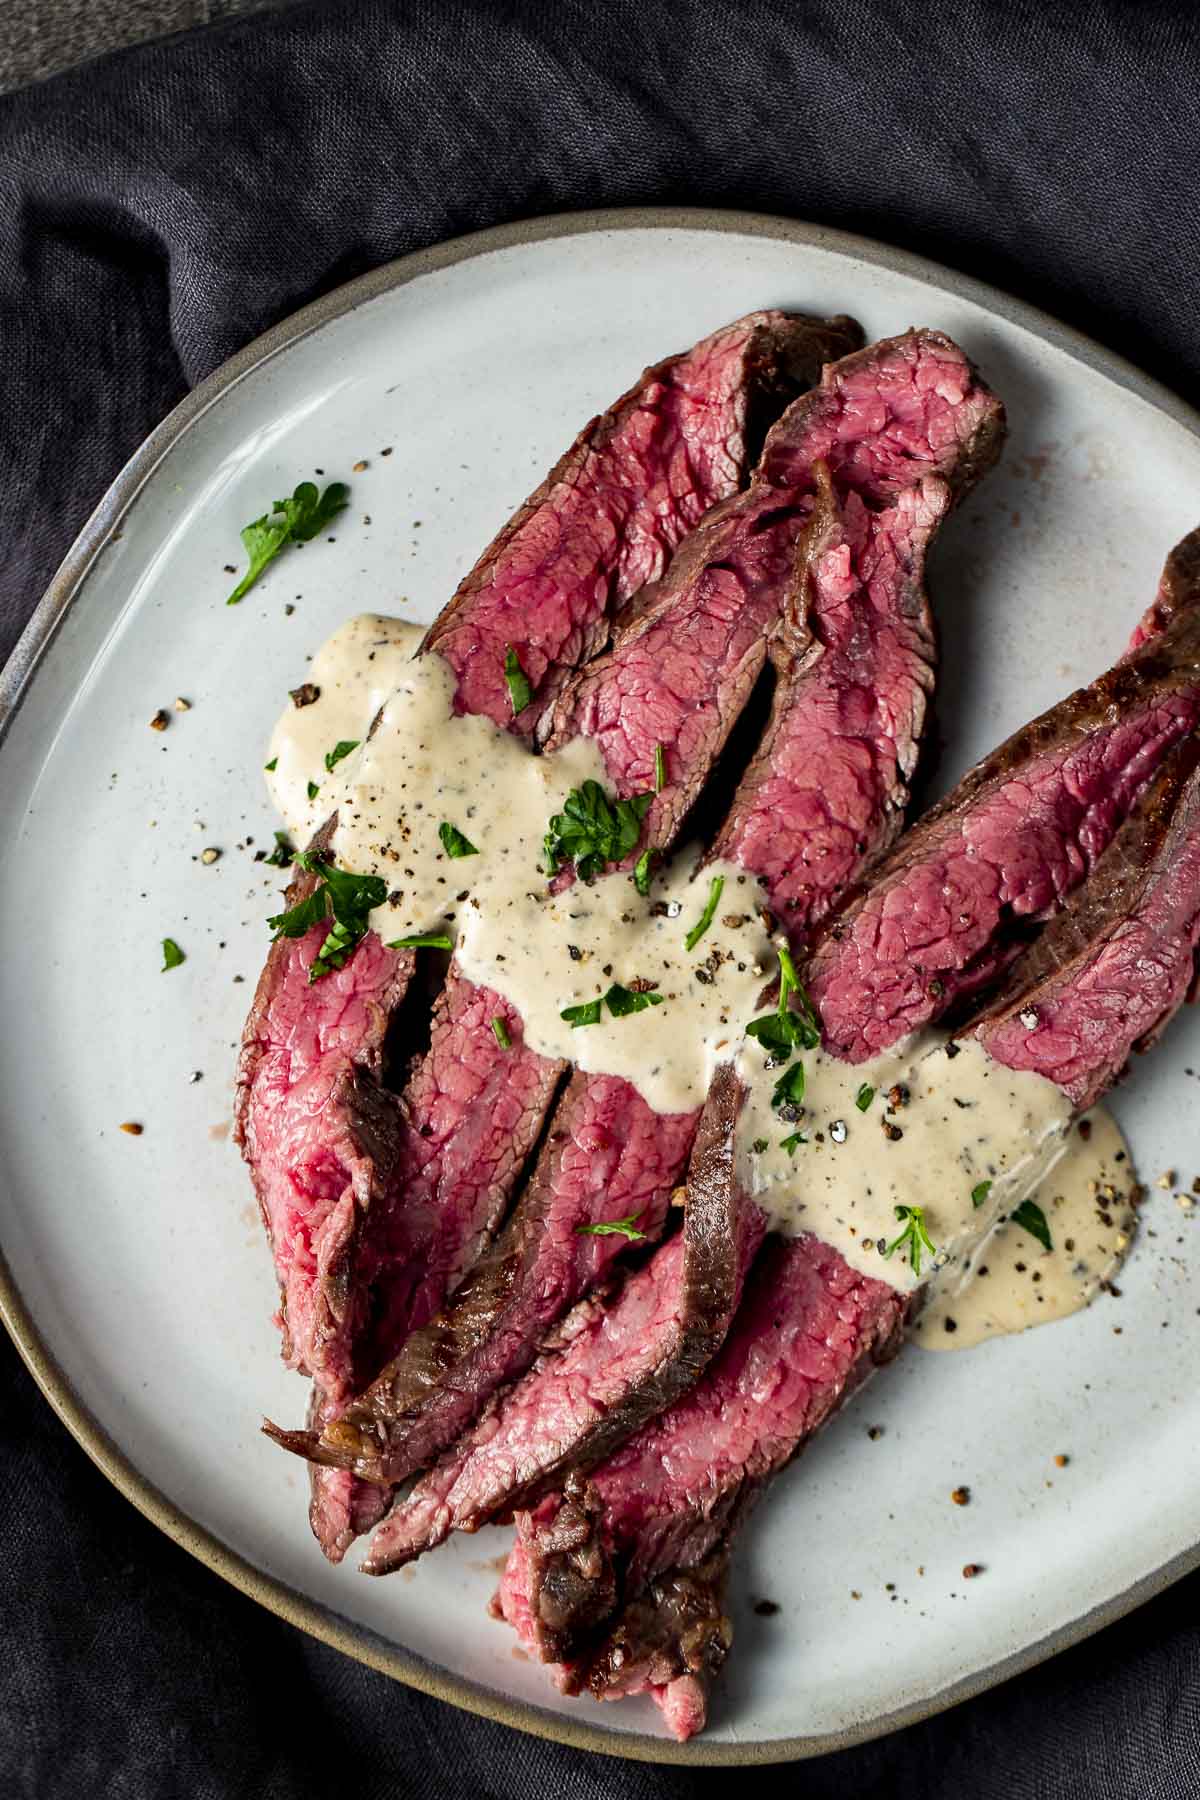 sliced beef on a plate with a white sauce